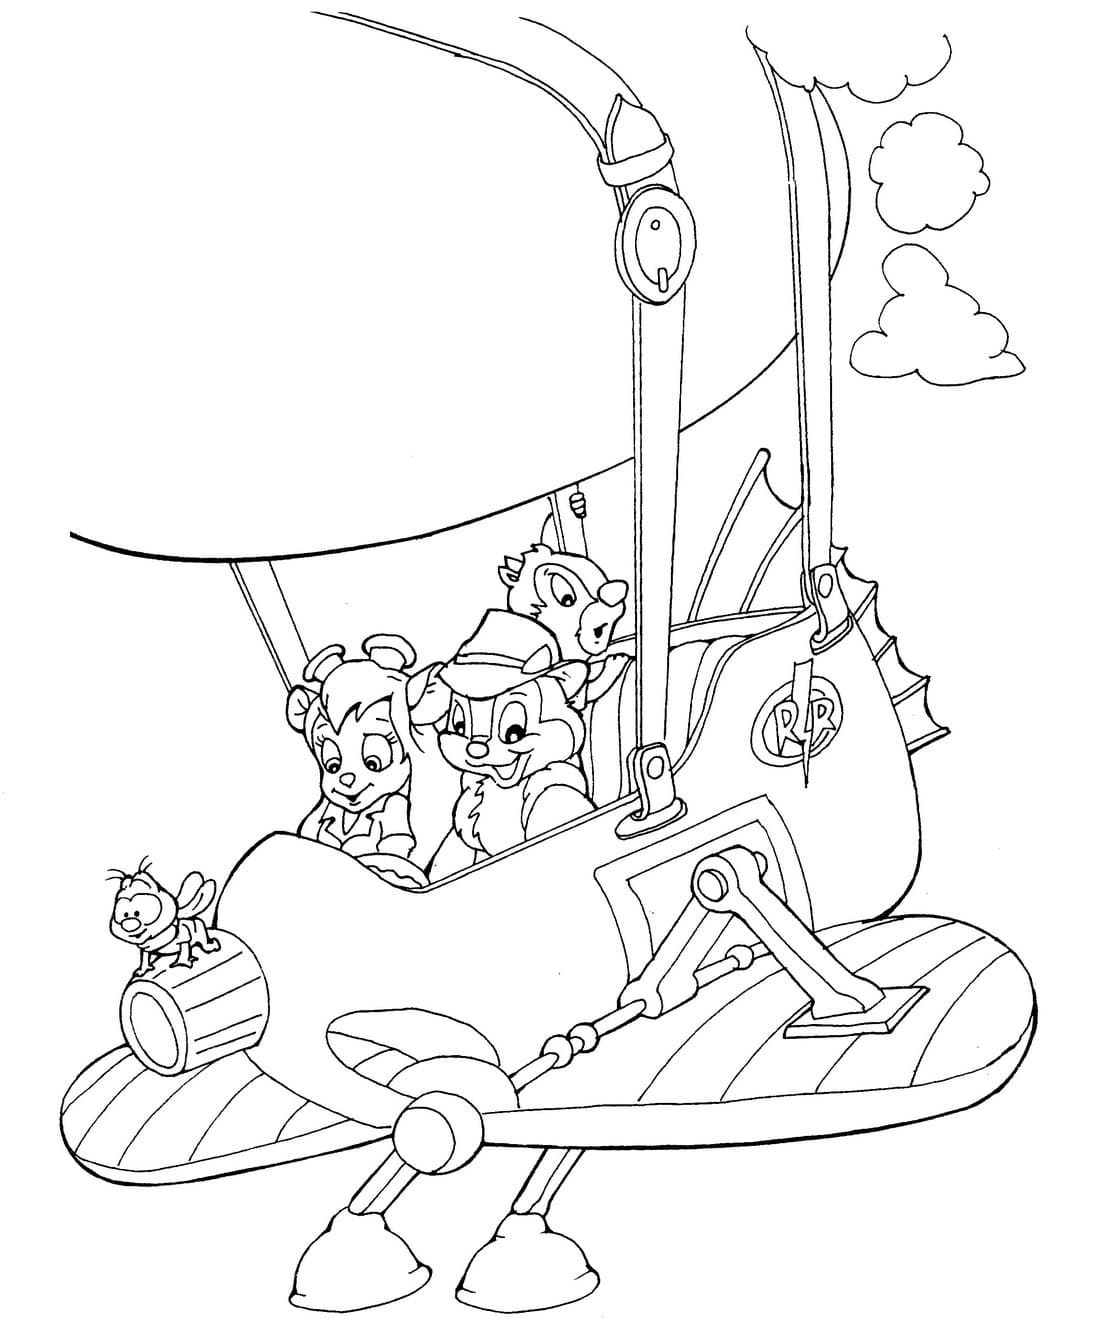 Coloring page Chip and Dale Cartoon Chip and Dale